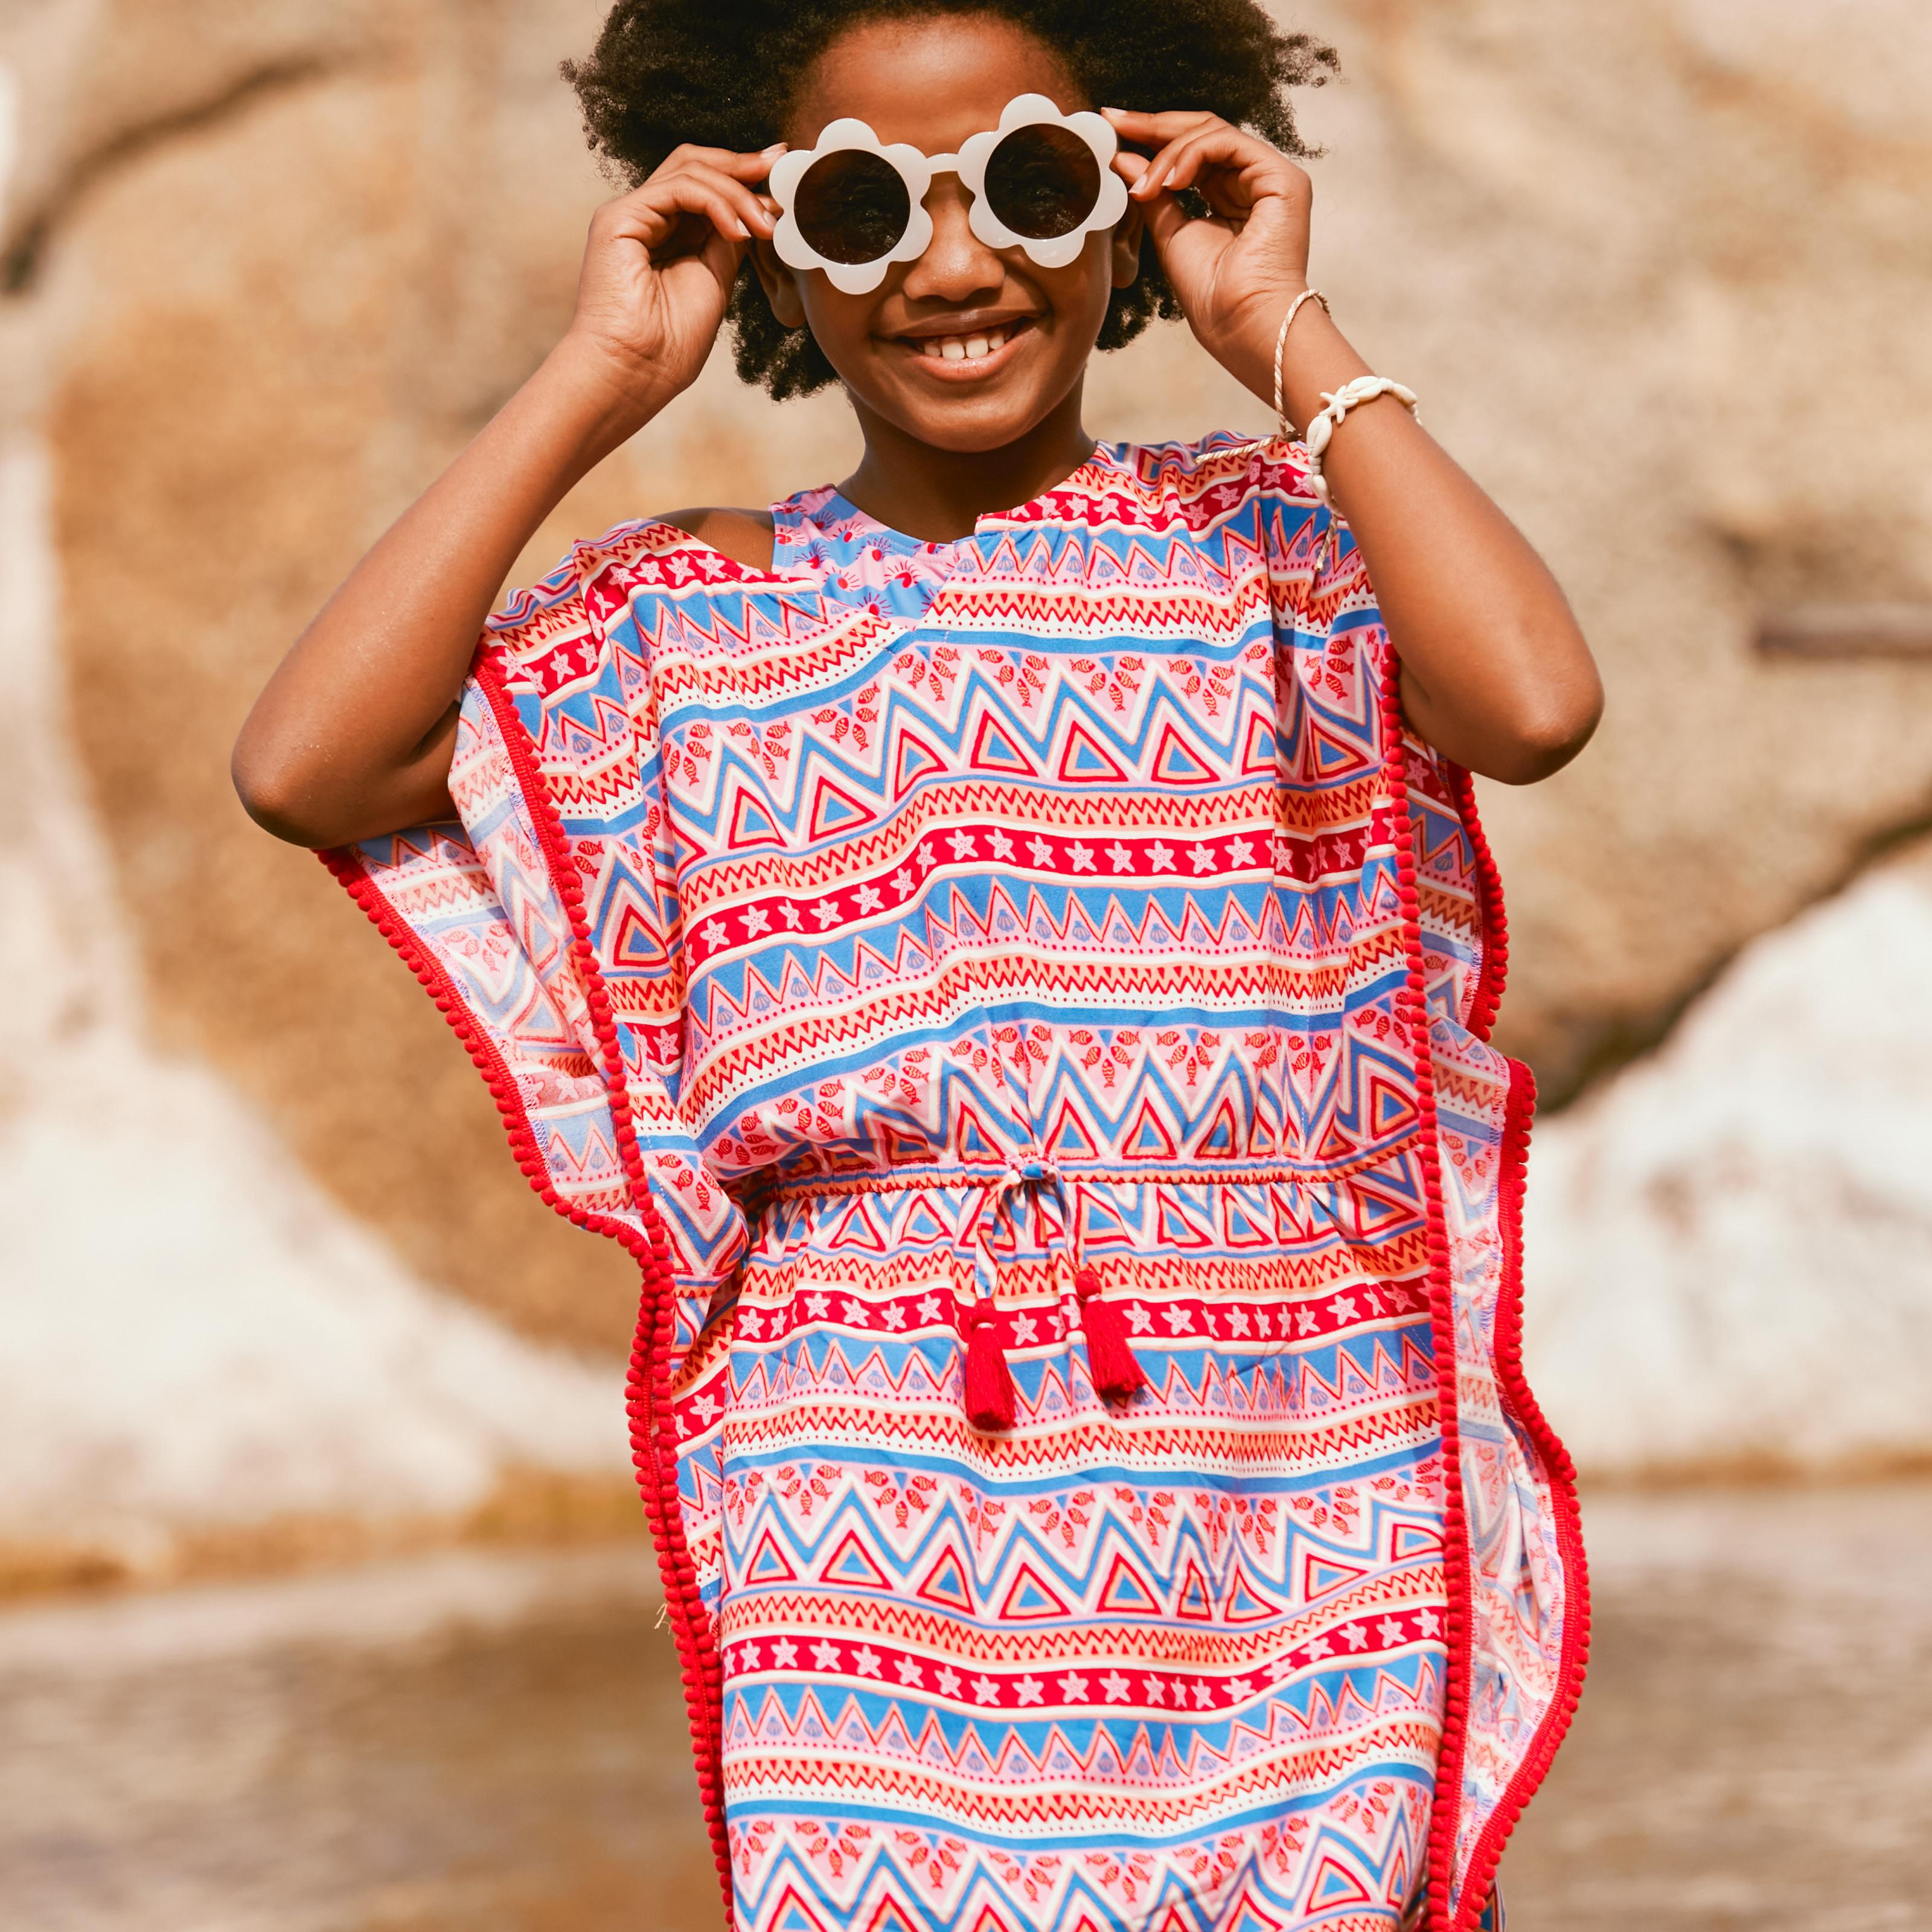 A girl wearing flower-shaped sunglasses & a brightly coloured kaftan with blue & red geometric prints & tie waist.